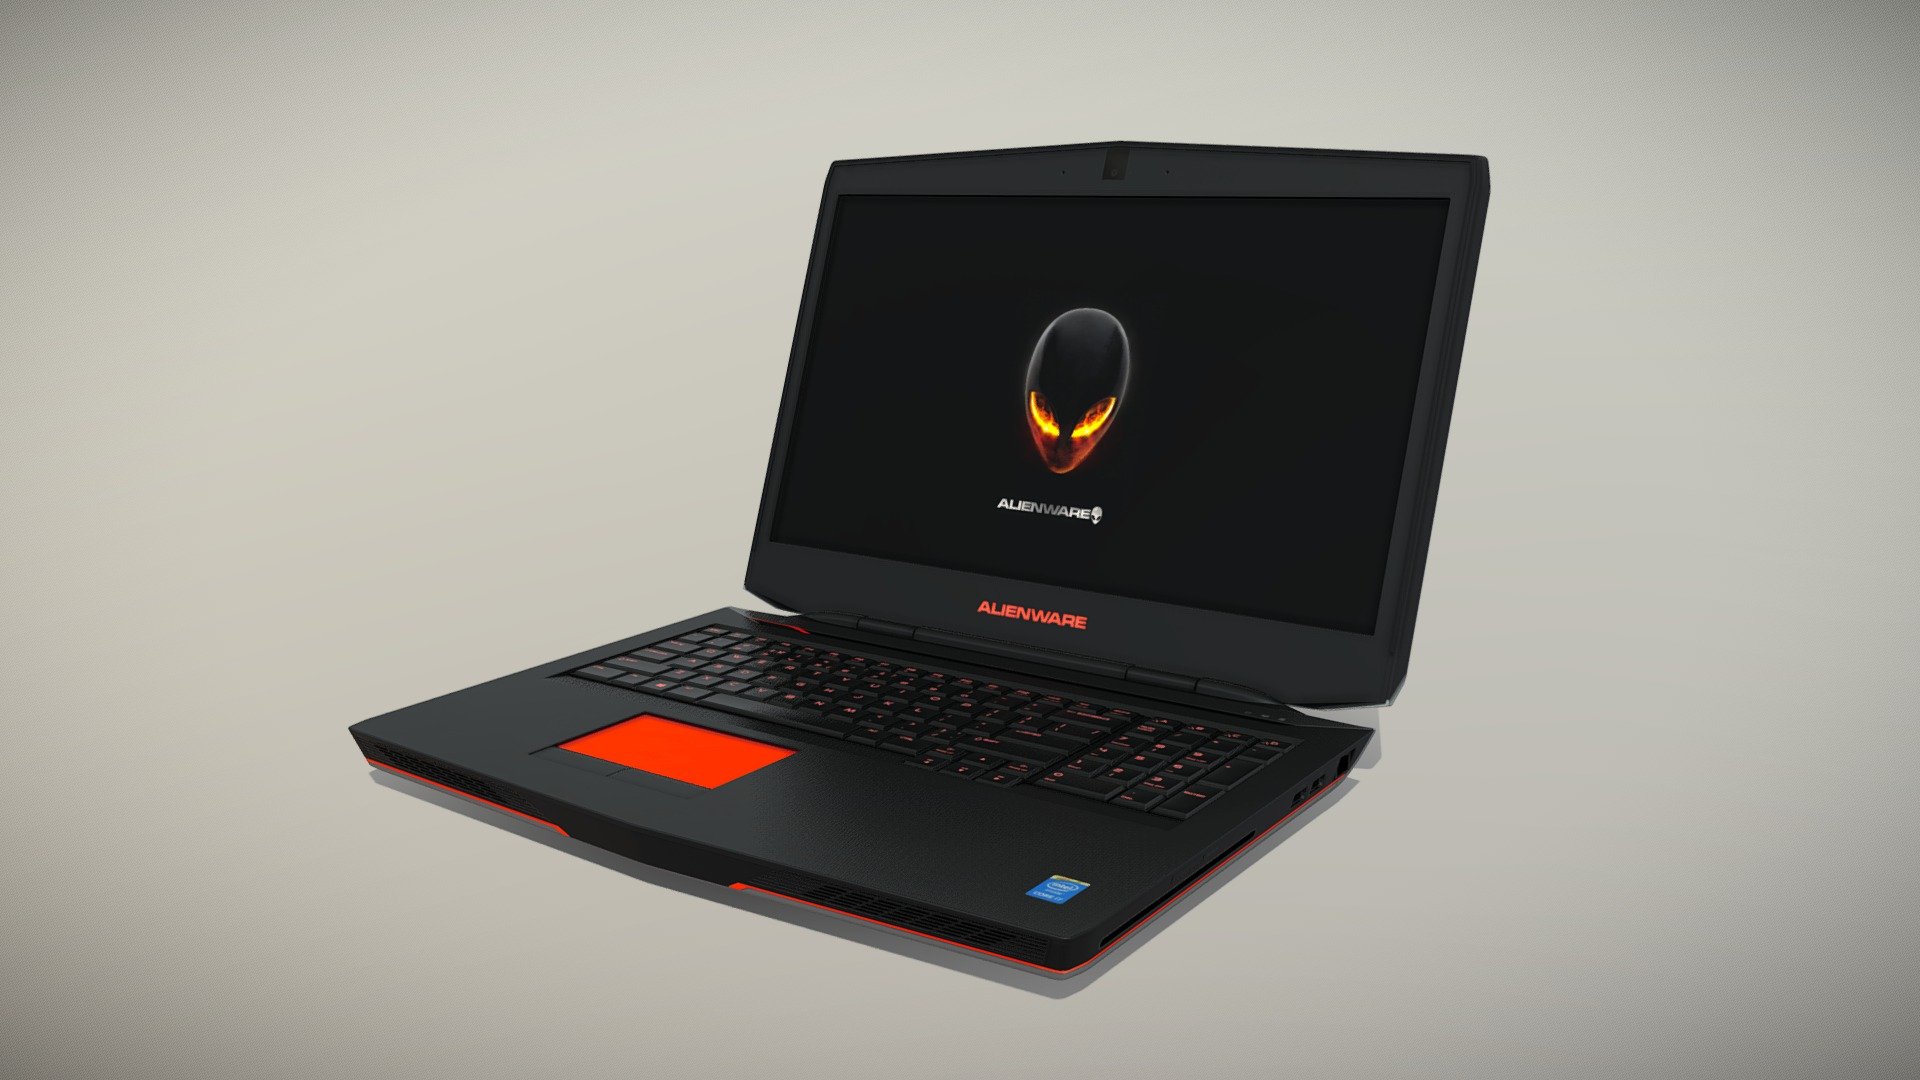 •   Let me present to you high-quality low-poly 3D model Dell Alienware 17. Modeling was made with ortho-photos of real laptop that is why all details of design are recreated most authentically.

•    This model consists of two meshes, it is low-polygonal and it has two materials (for Display and Body).

•   The total of the main textures is 10. Resolution of all textures is 4096 pixels square aspect ratio in .png format. Also there is original texture file .PSD format in separate archive.

•   Polygon count of the model is – 7737.

•   The model has correct dimensions in real-world scale. All parts grouped and named correctly.

•   To use the model in other 3D programs there are scenes saved in formats .fbx, .obj, .DAE, .max (2010 version).

Note: If you see some artifacts on the textures, it means compression works in the Viewer. We recommend setting HD quality for textures. But anyway, original textures have no artifacts 3d model